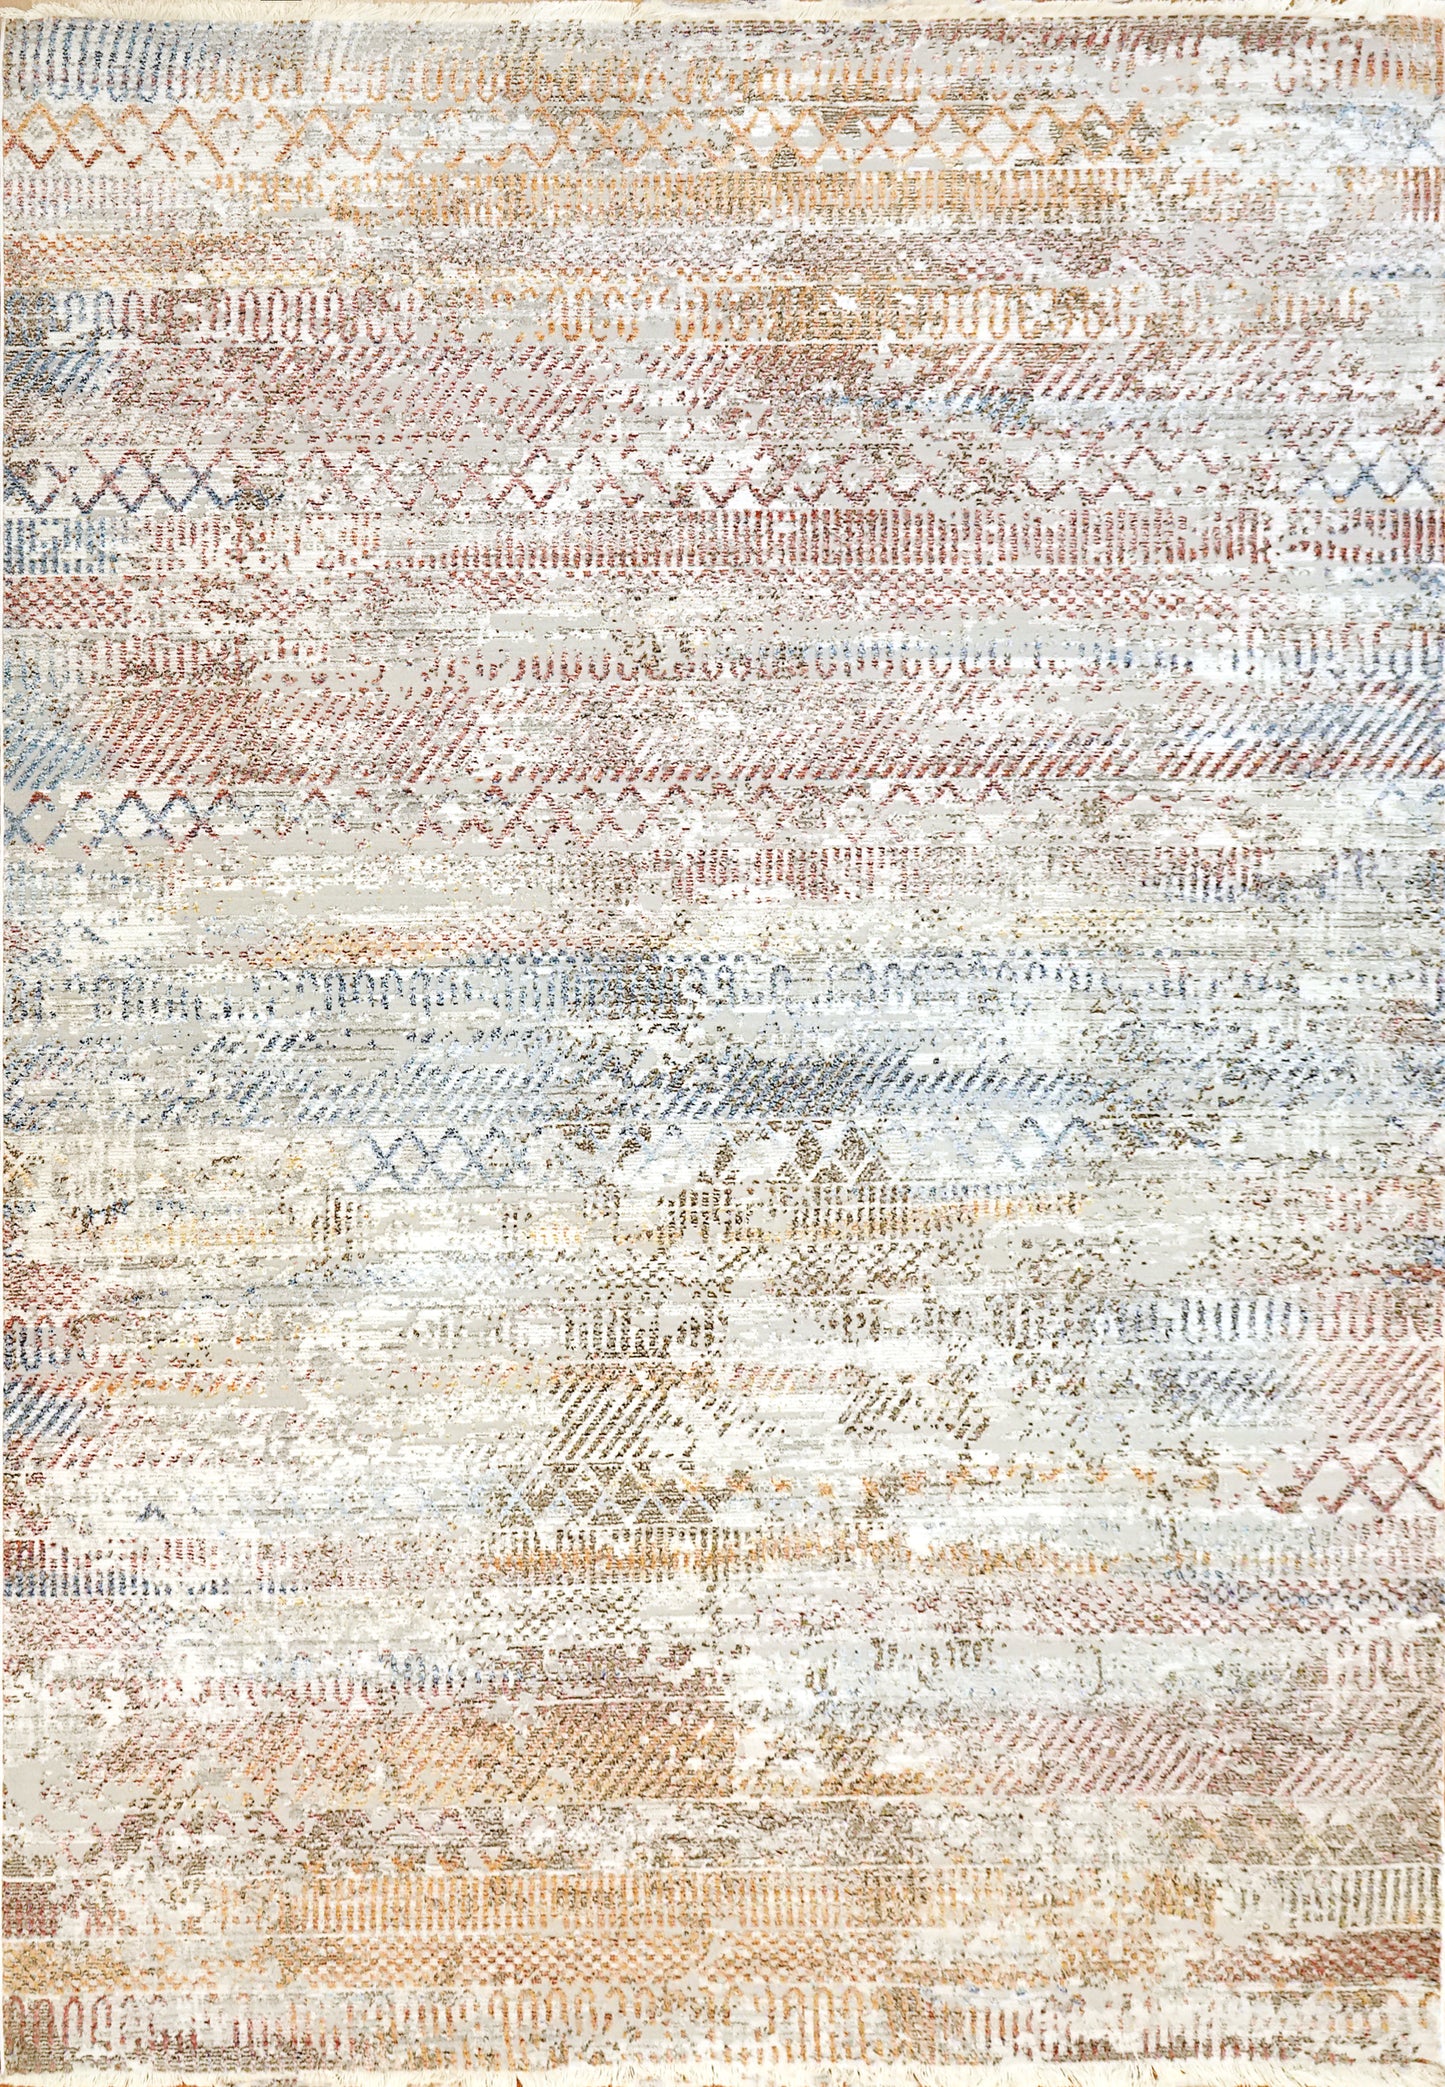 Dynamic Rugs Mood 8450-130 Ivory/Red Area Rug